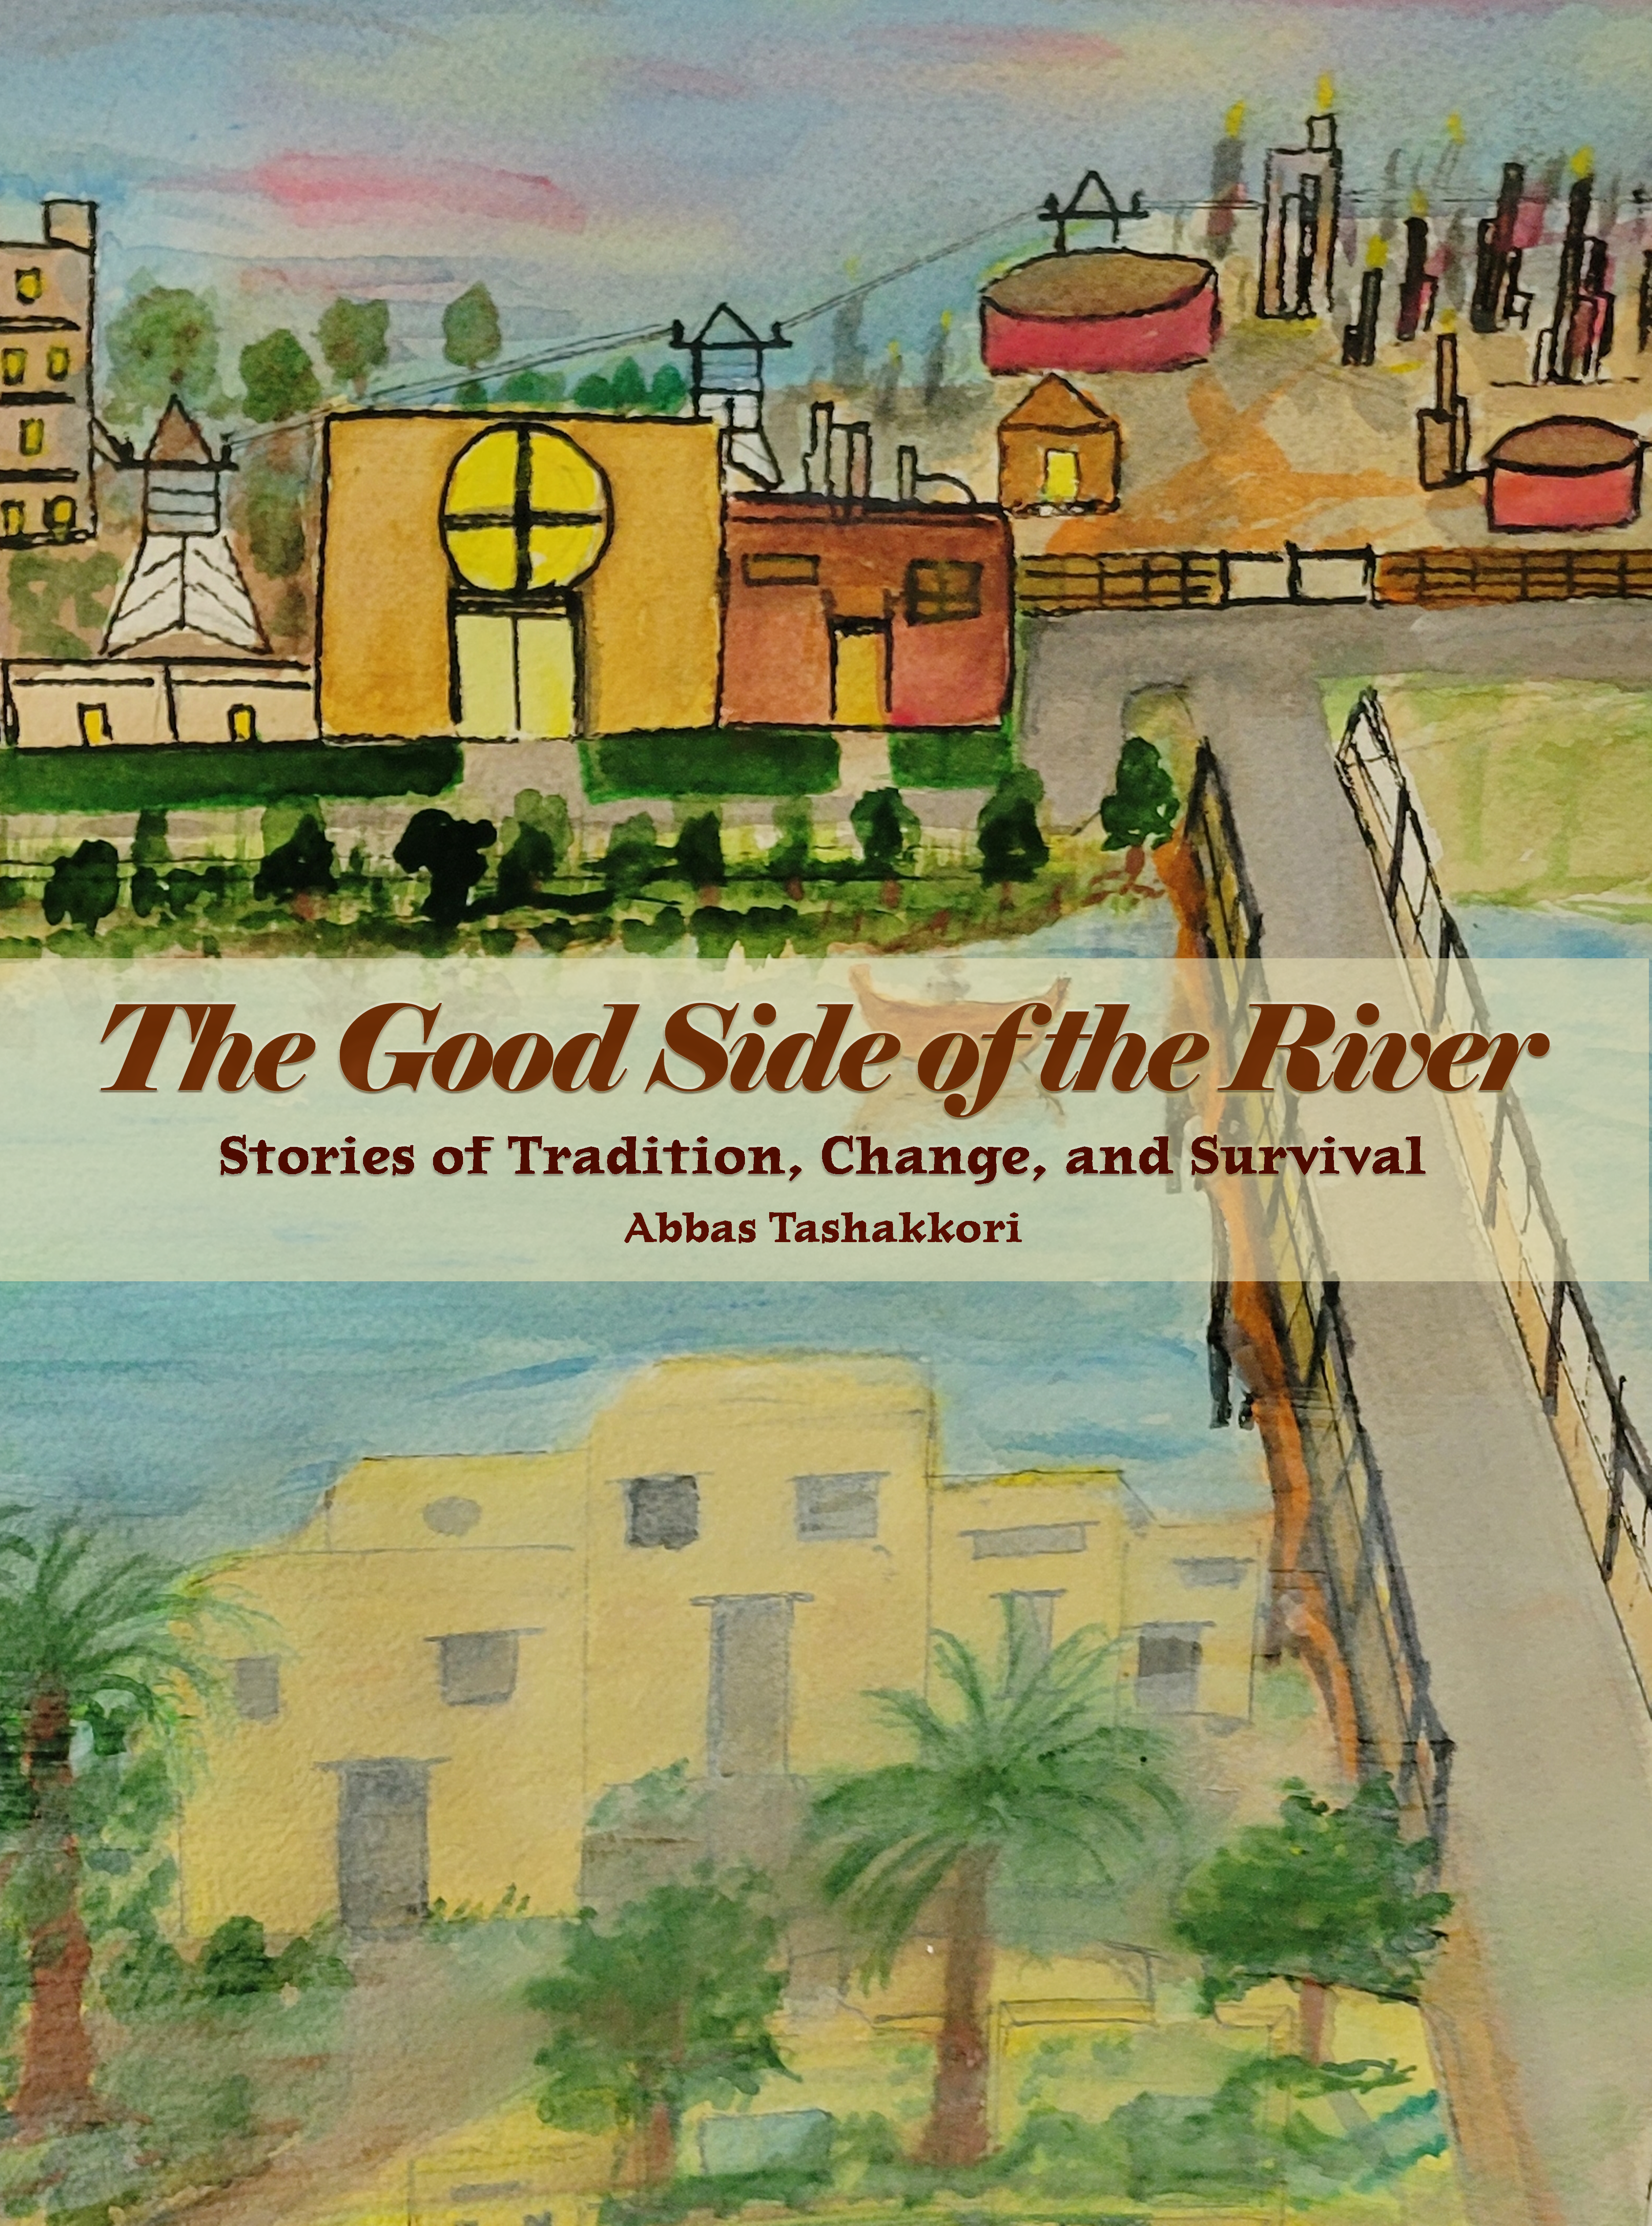 The Good Side of the River